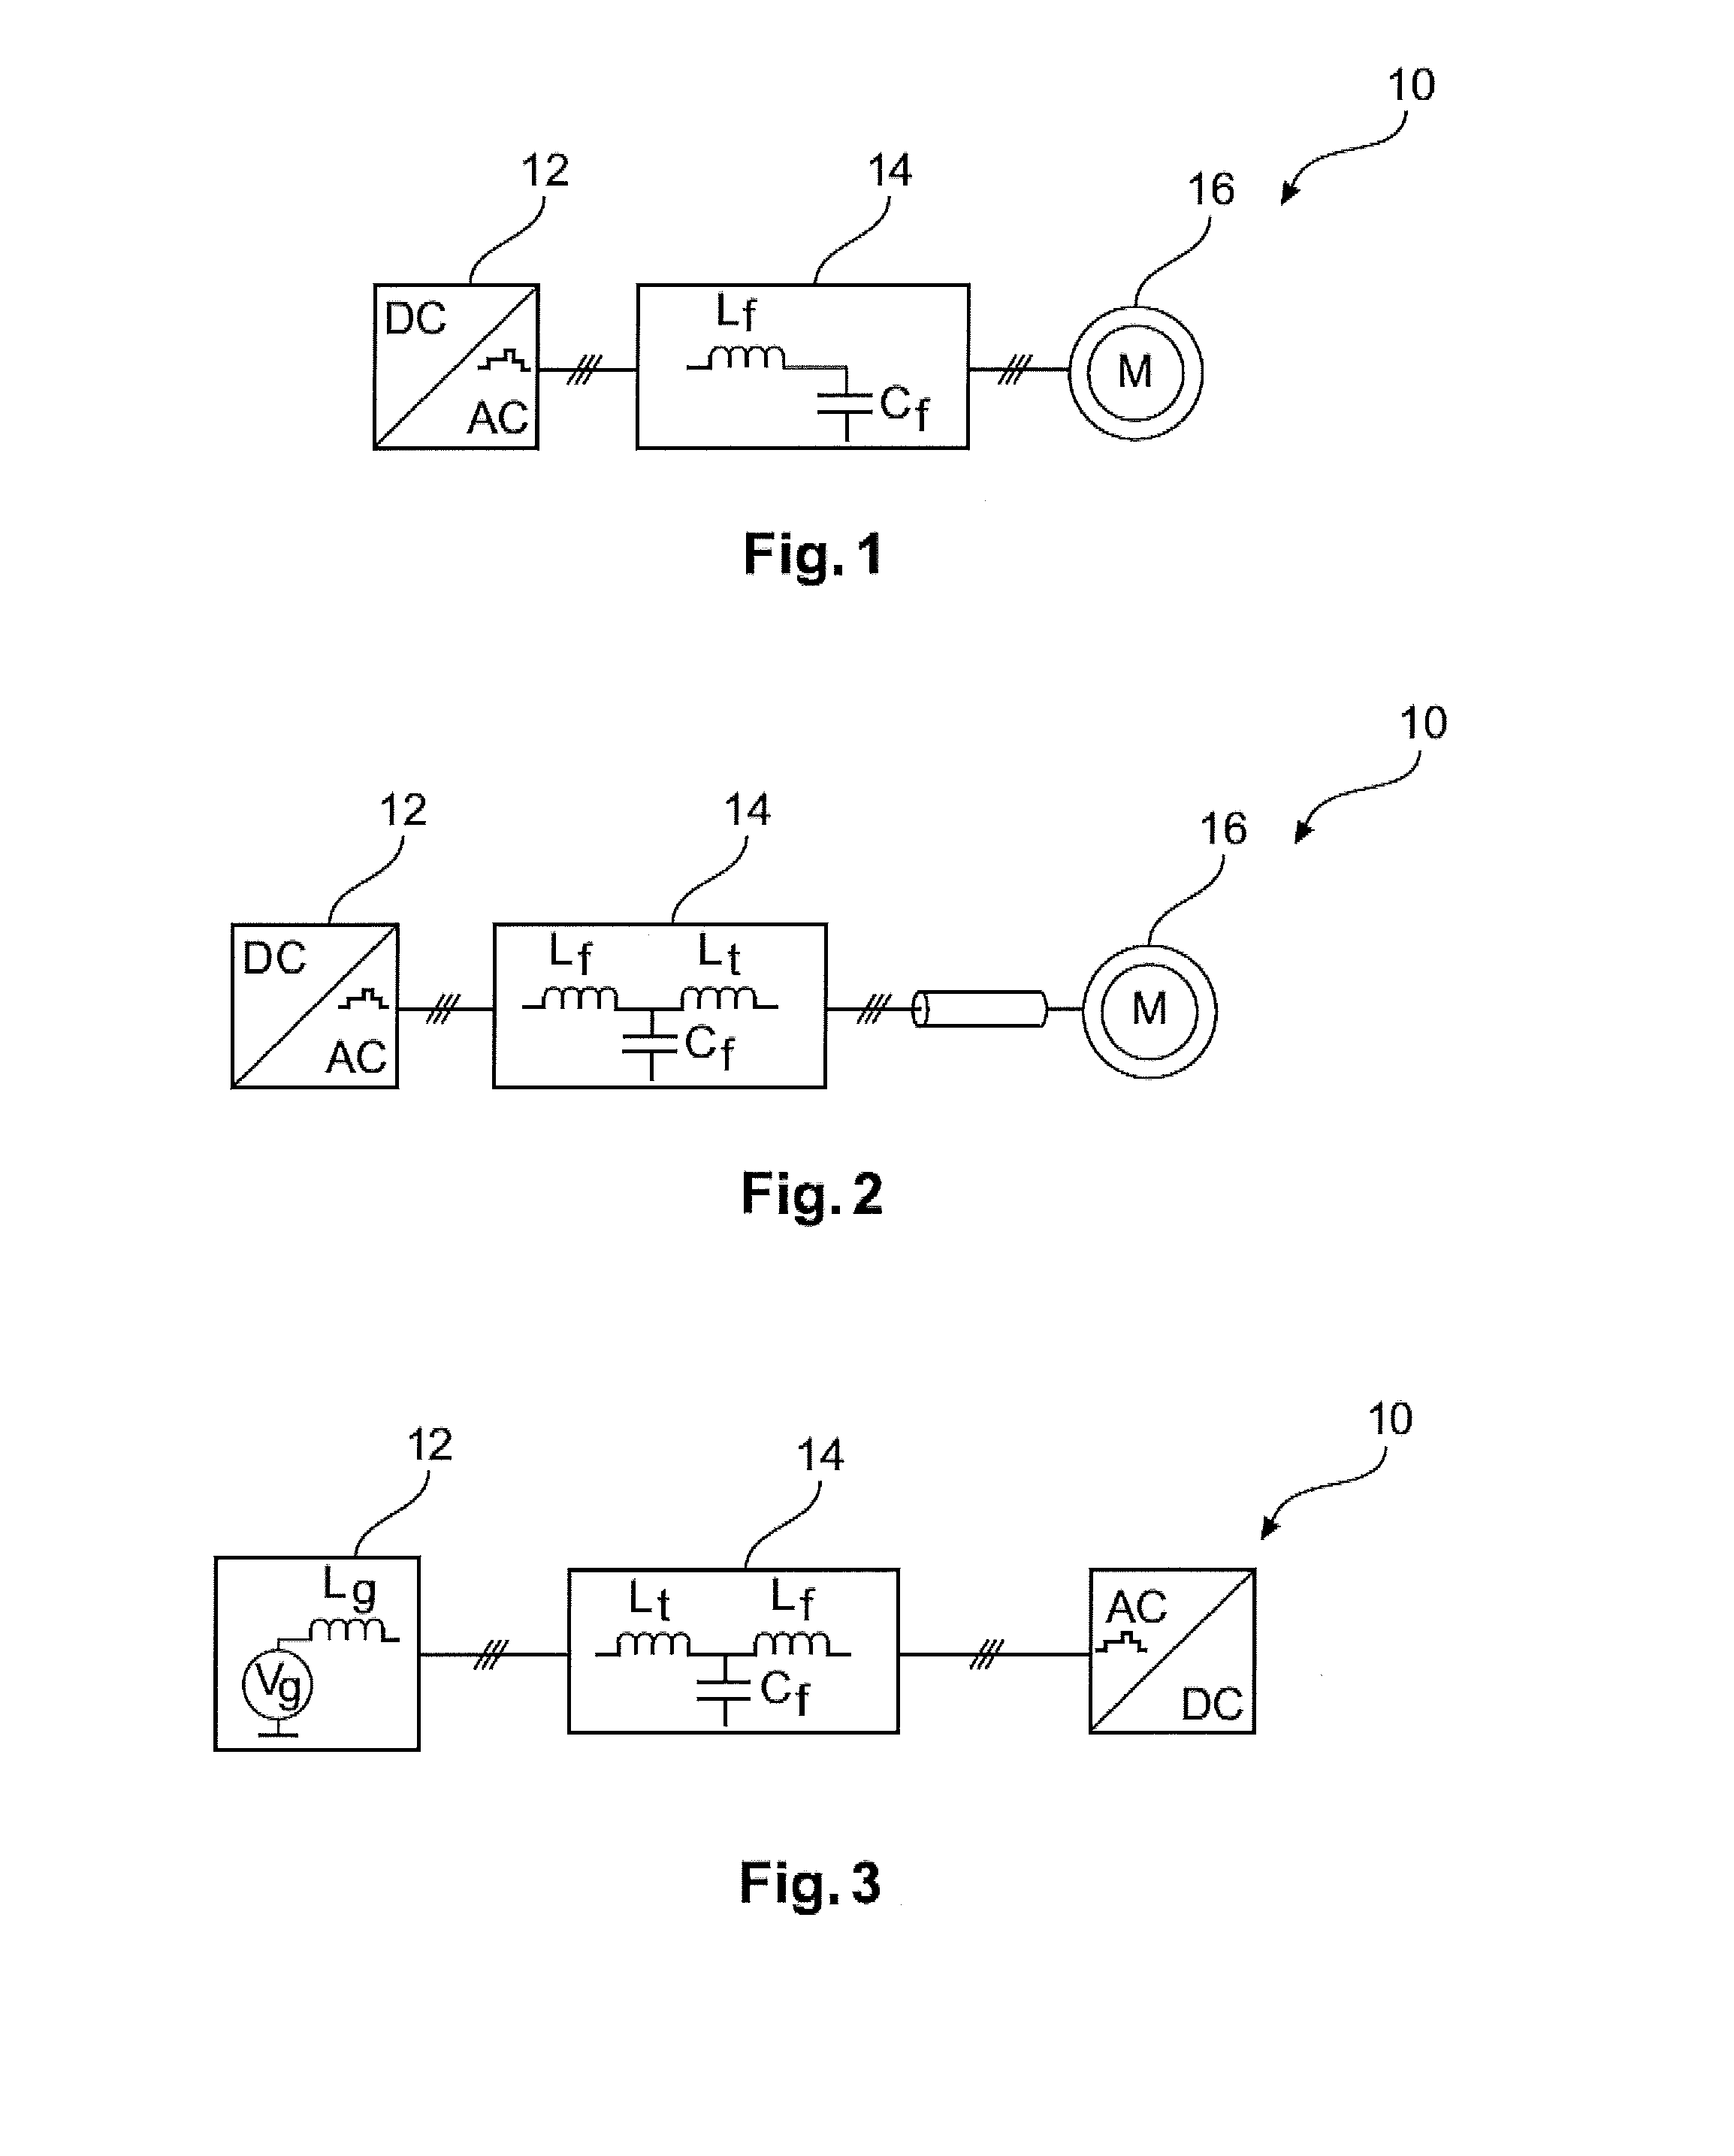 Control method for electrical converter with lc filter